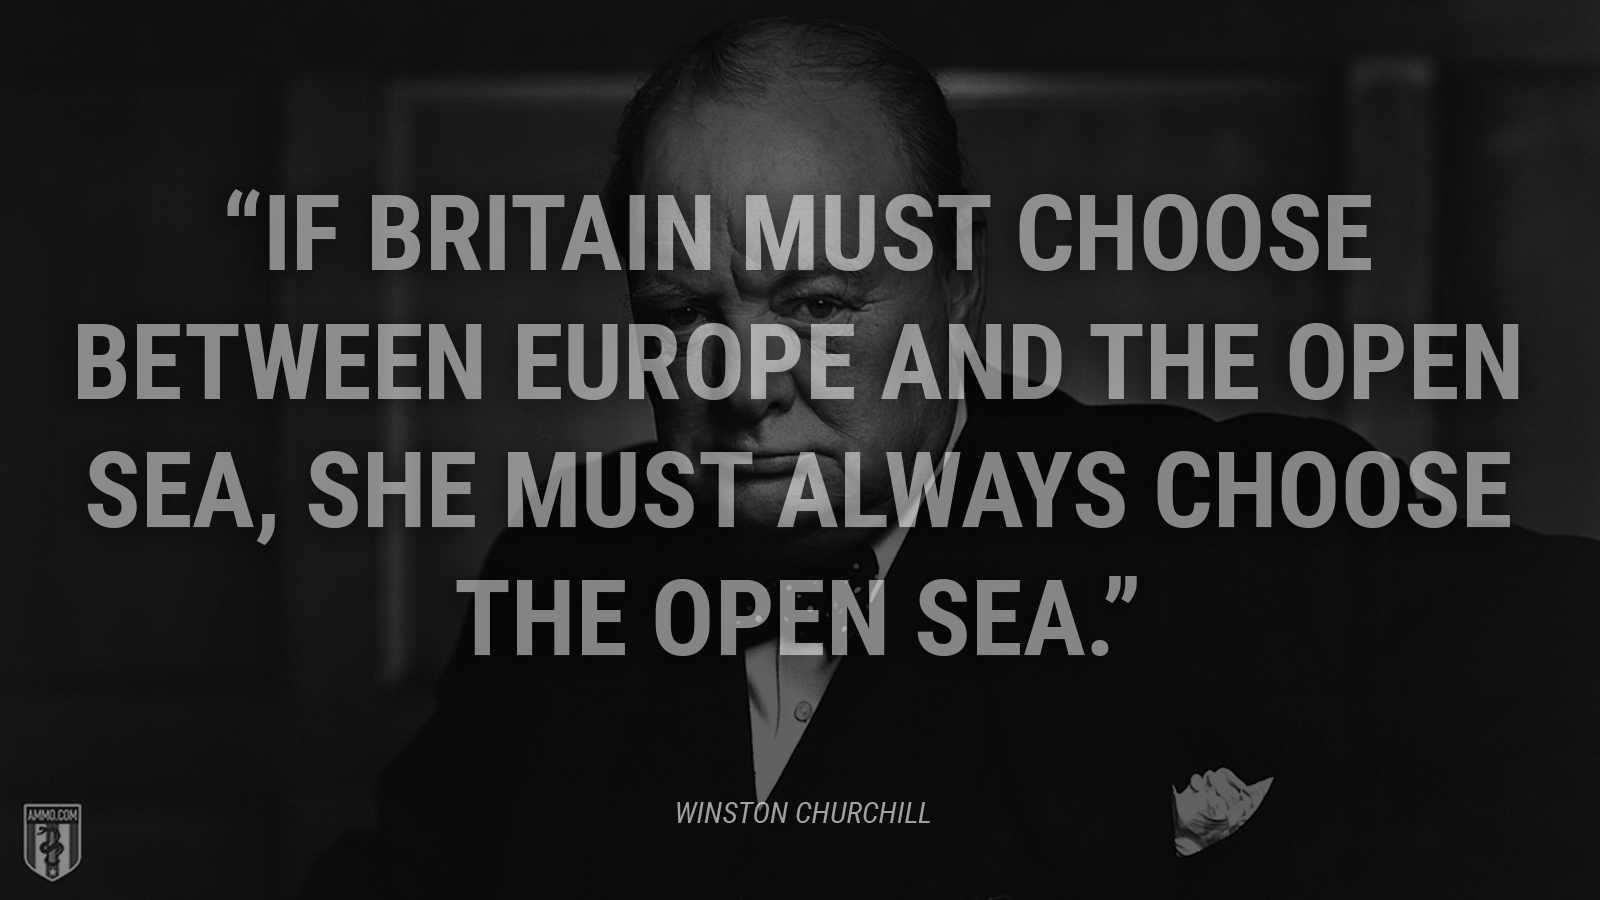 “If Britain must choose between Europe and the open sea, she must always choose the open sea.” - Winston Churchill